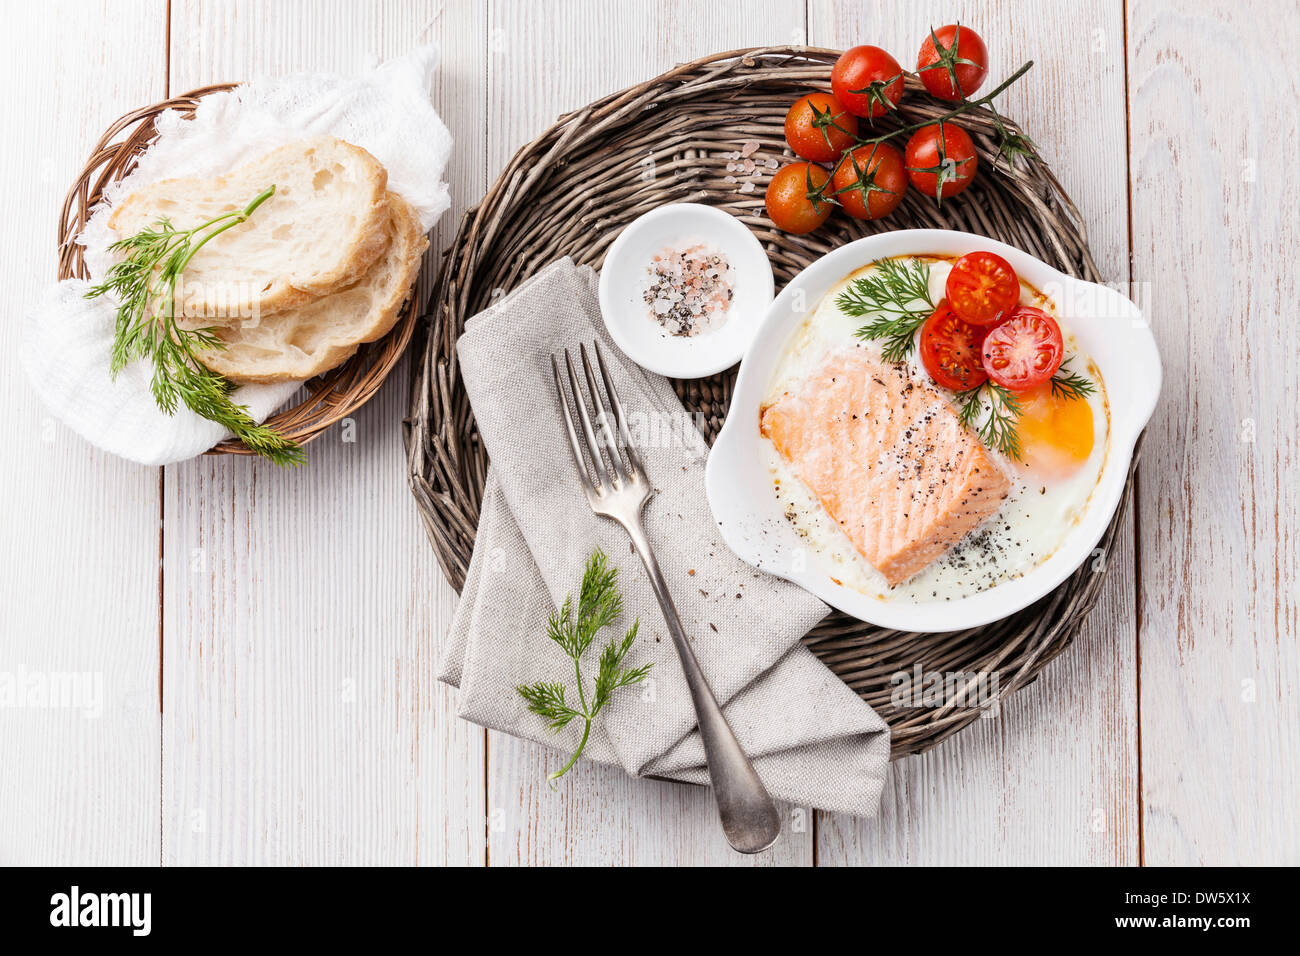 Baked salmon with eggs for breakfast Stock Photo